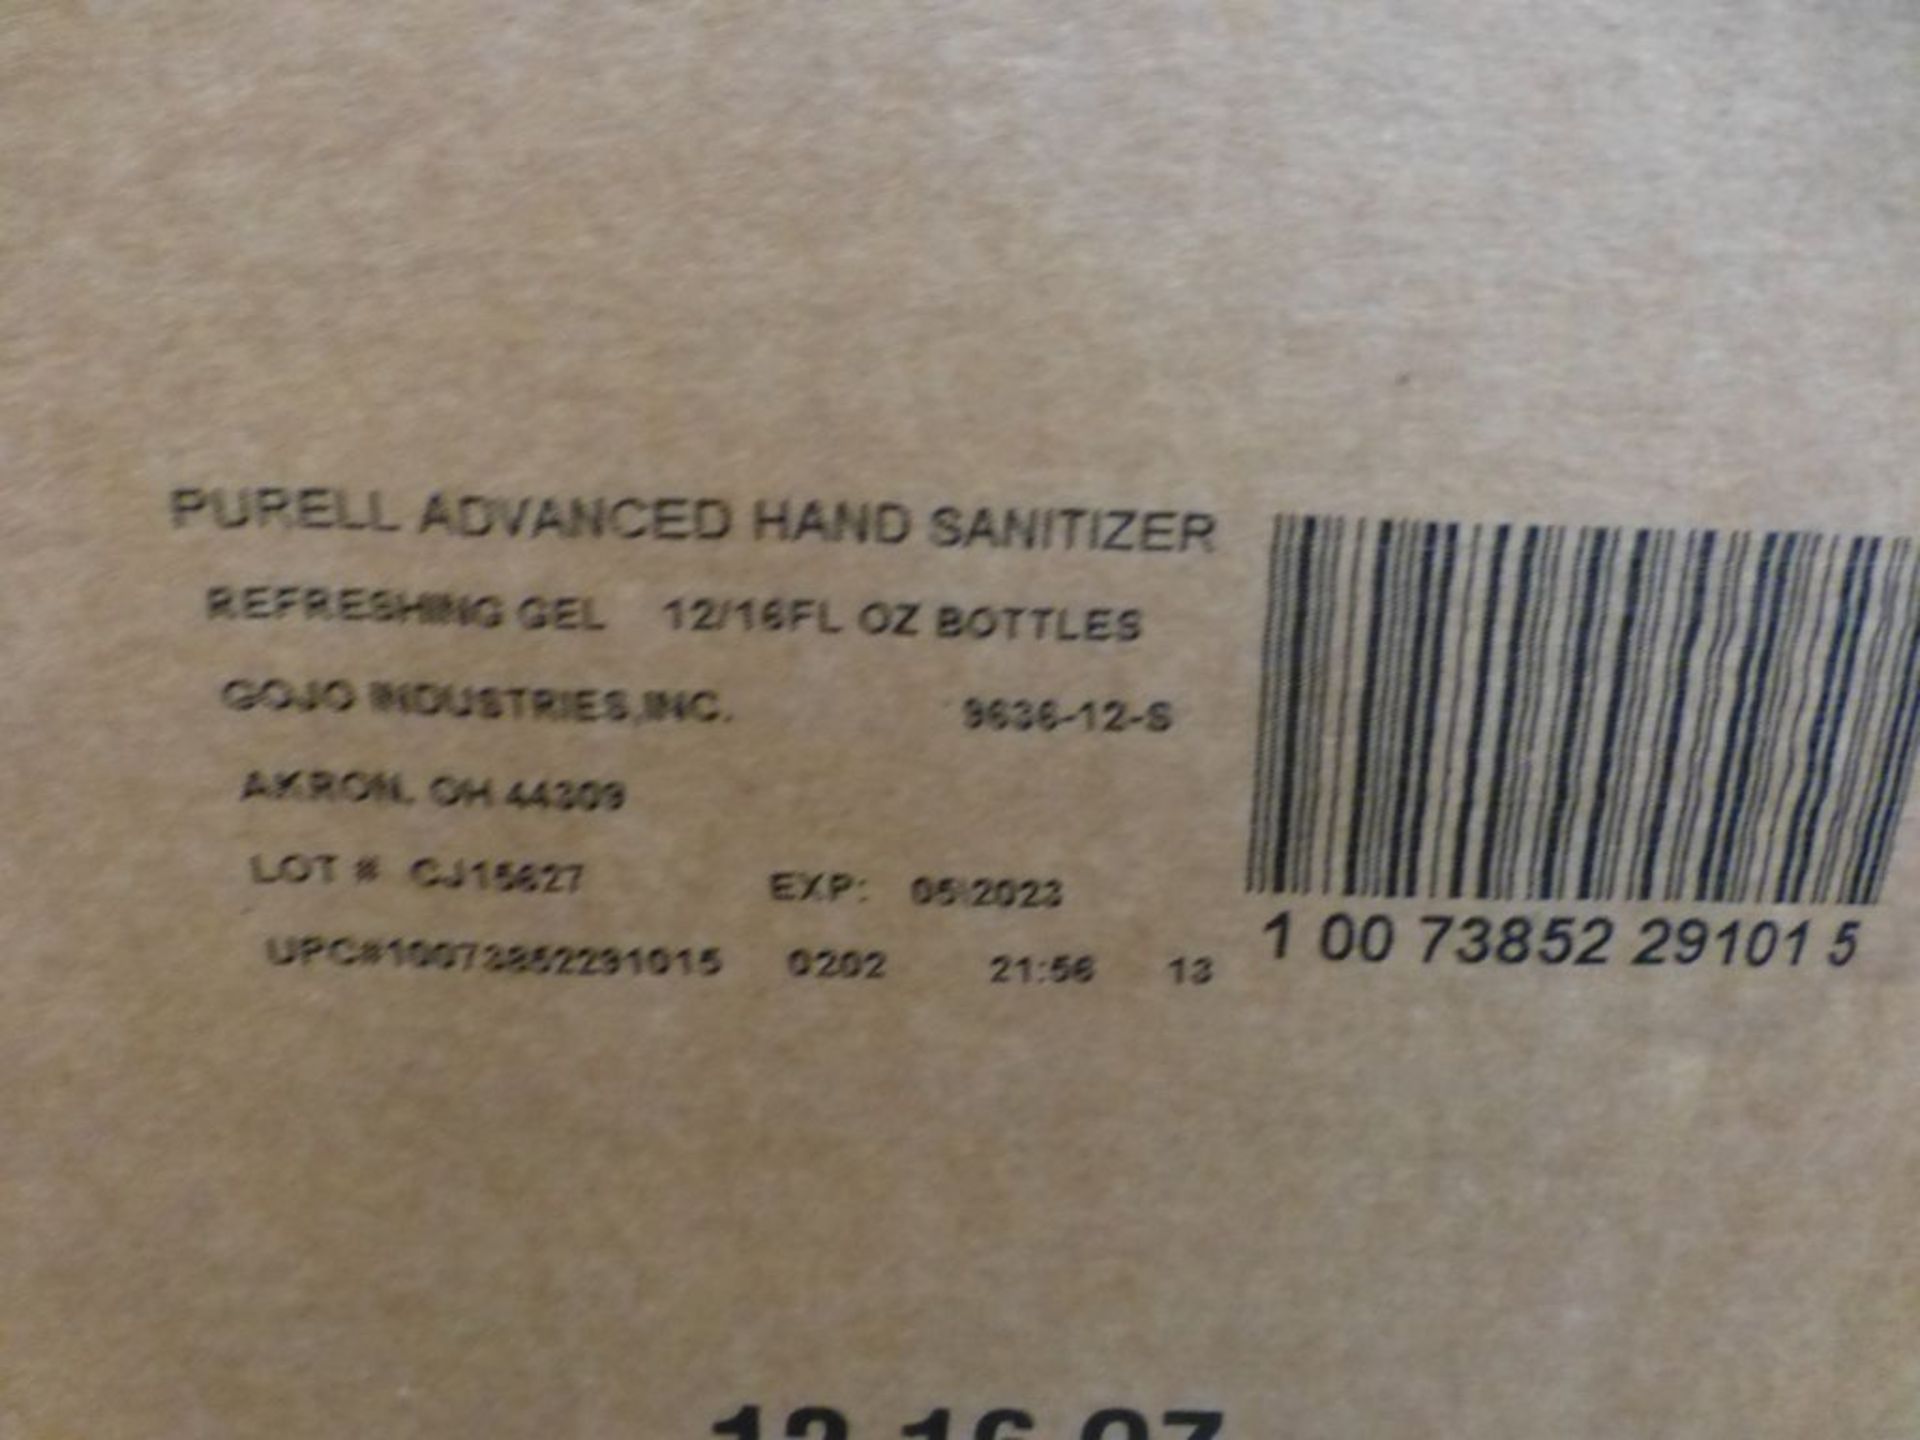 Lot of (540) 16 oz. Bottles of Purrell Advanced Emergency Response Gel Hand Sanitizer - Part No. - Image 5 of 7